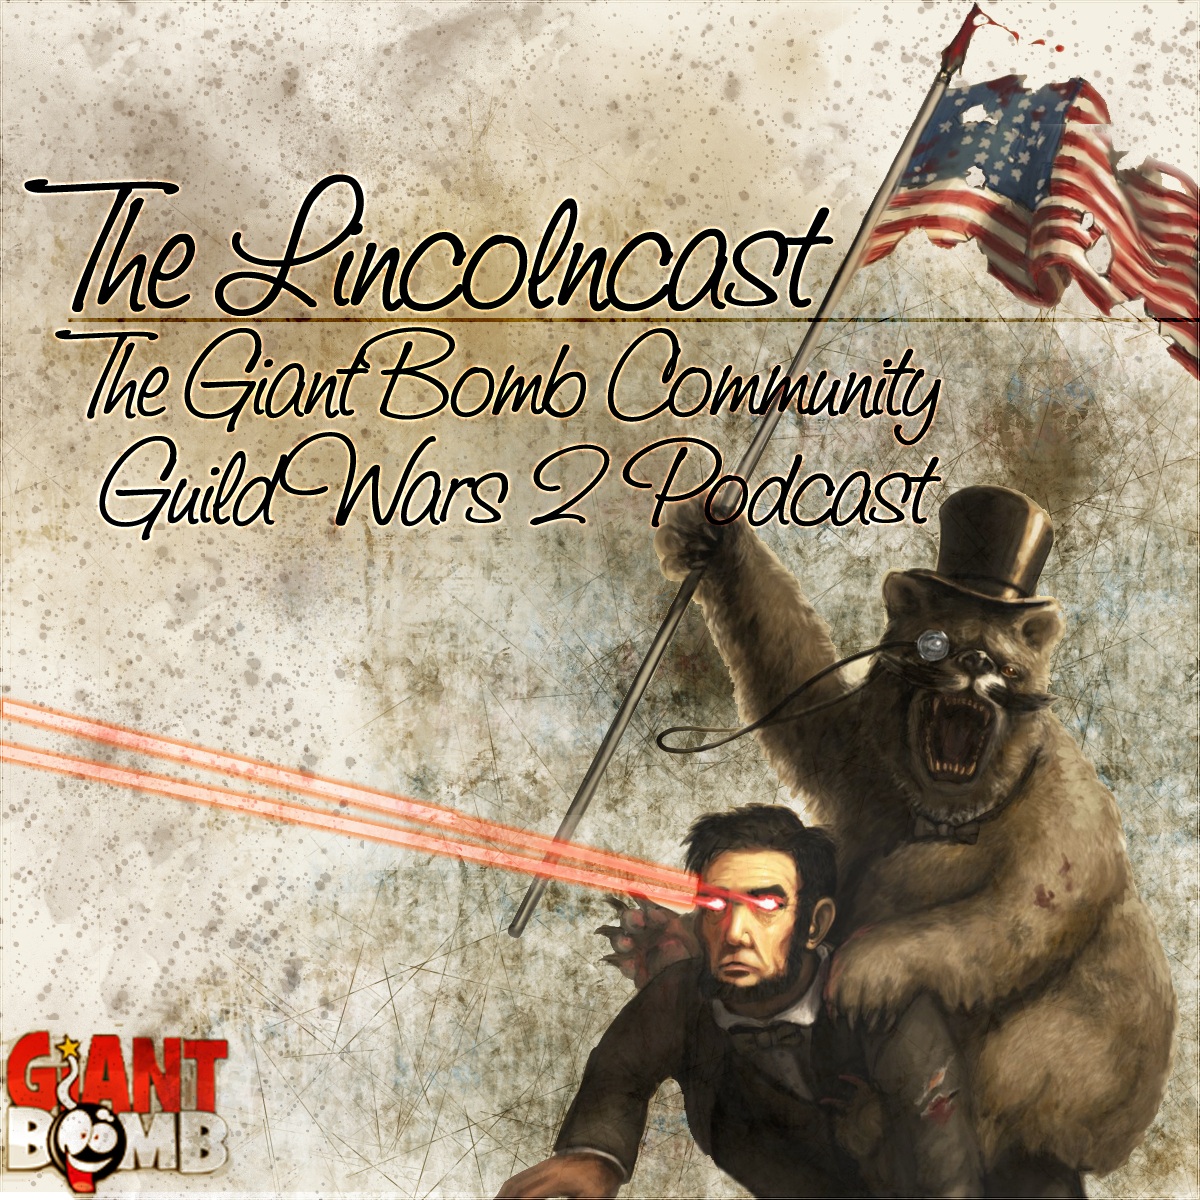 The Lincolncast Episode 58 - The LincolnScotch